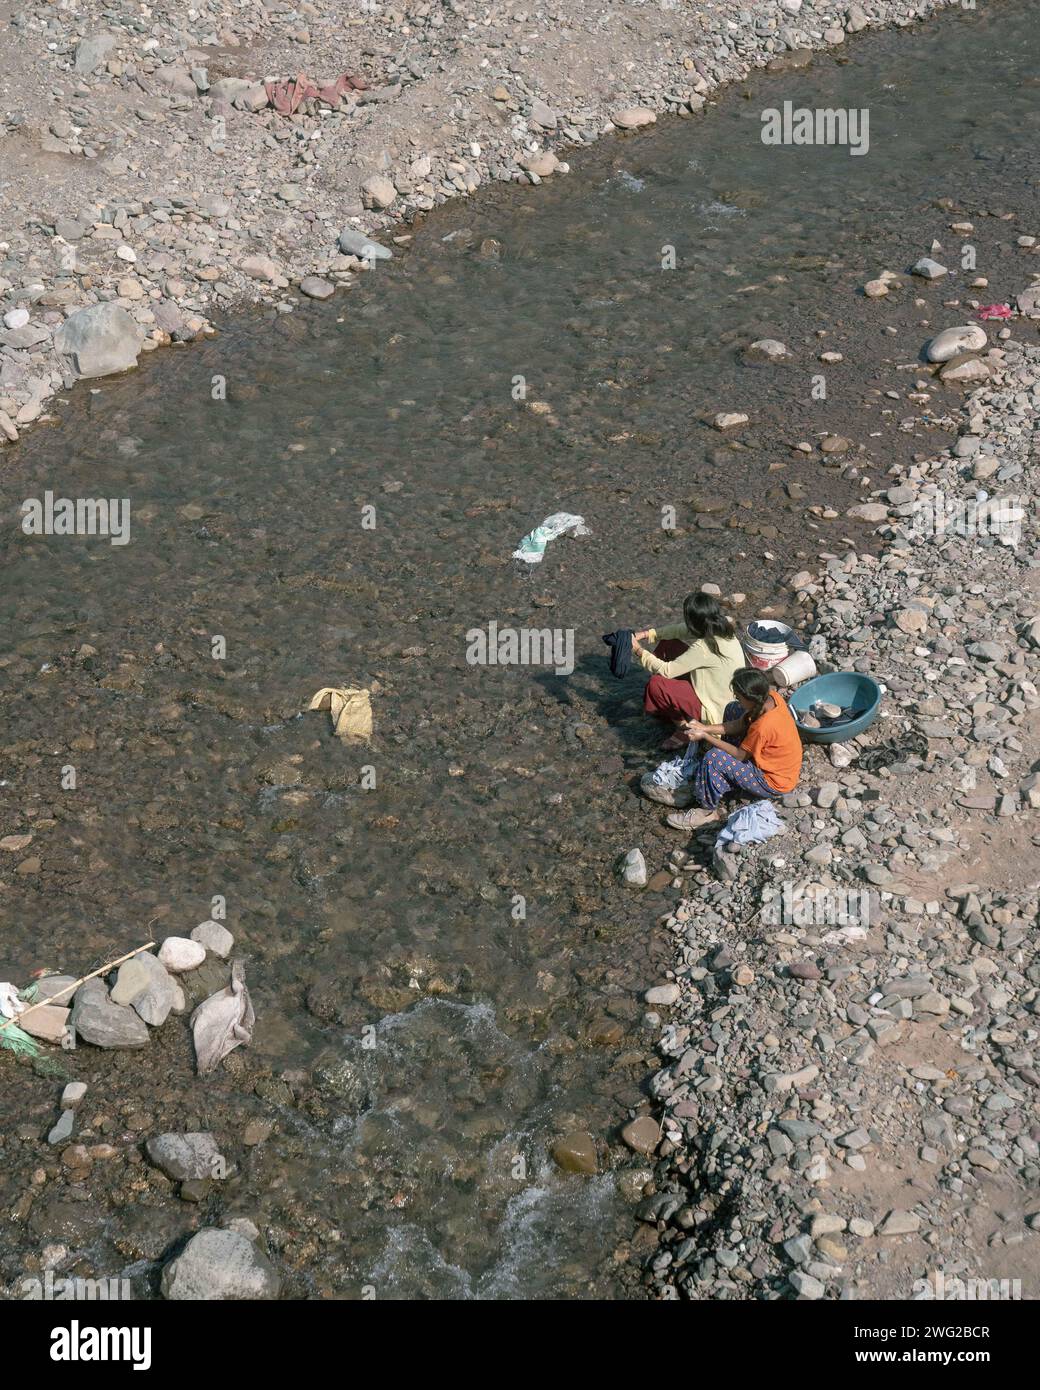 Two Nepali children wash clothes in the river A mountain view looking out over a lush green valley in Birendranagar, Karnali Province, Western Nepal. Stock Photo